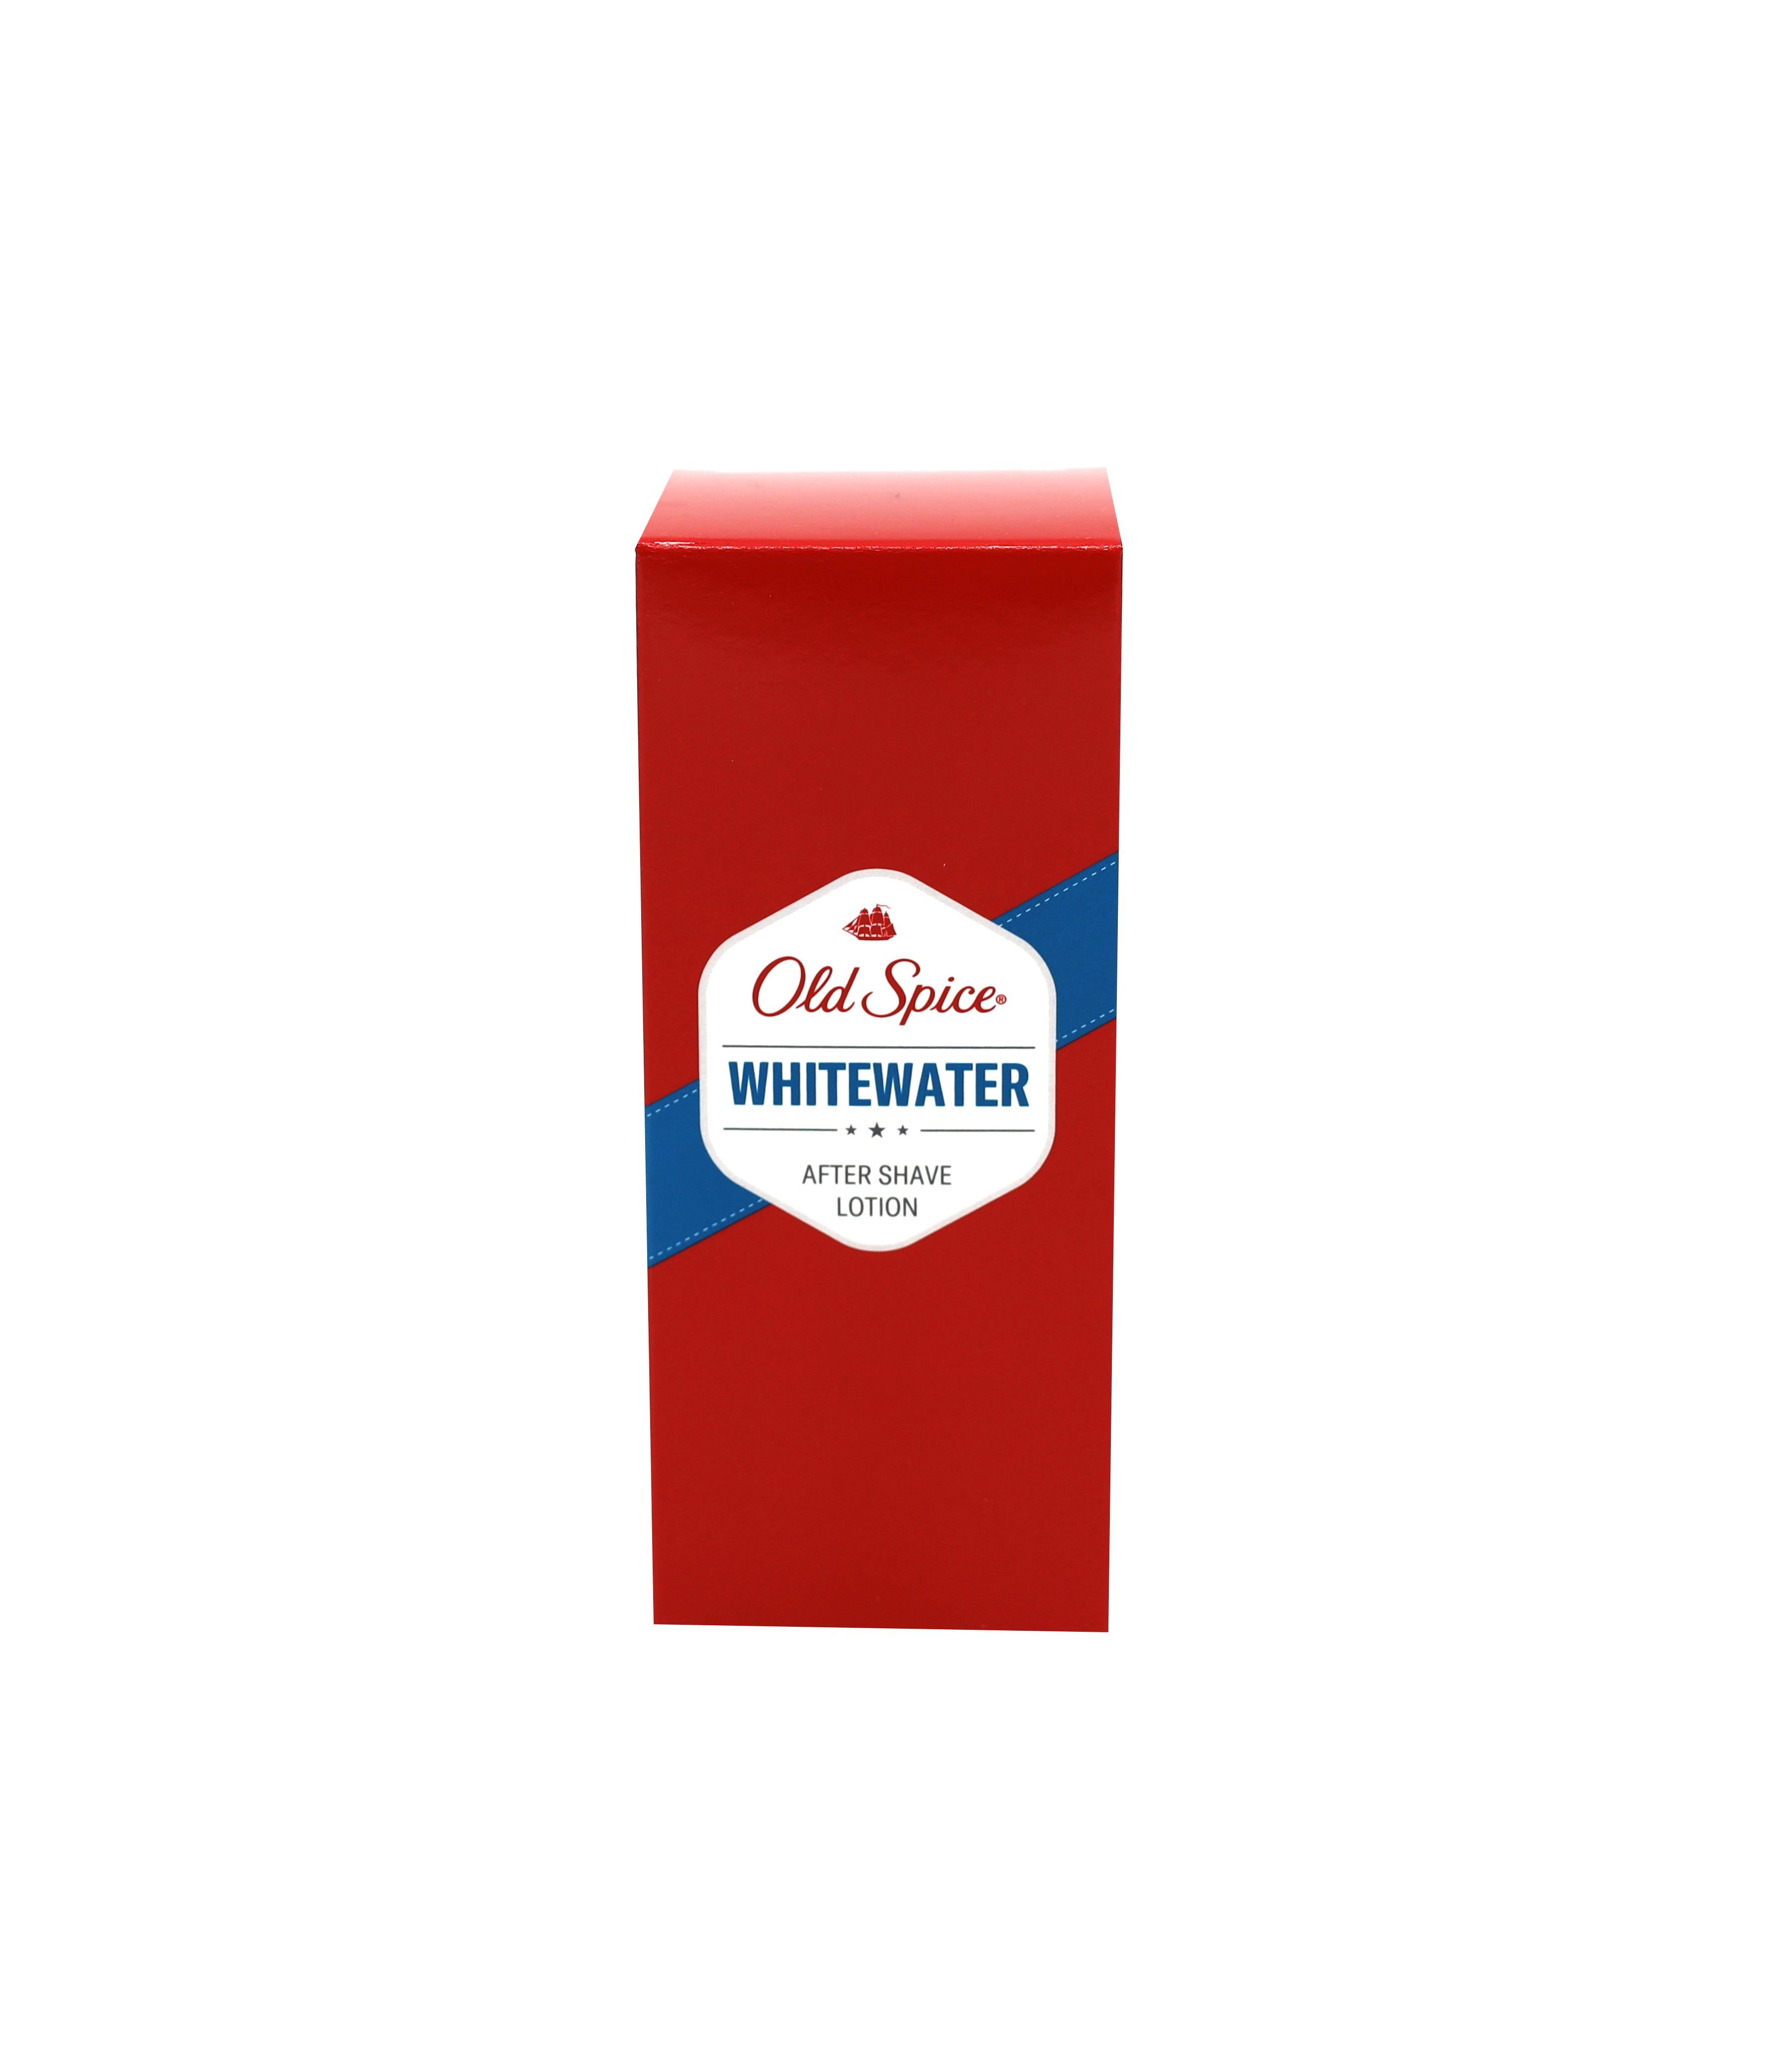 Old Spice Aftershave Lotion 100ml Whitewater